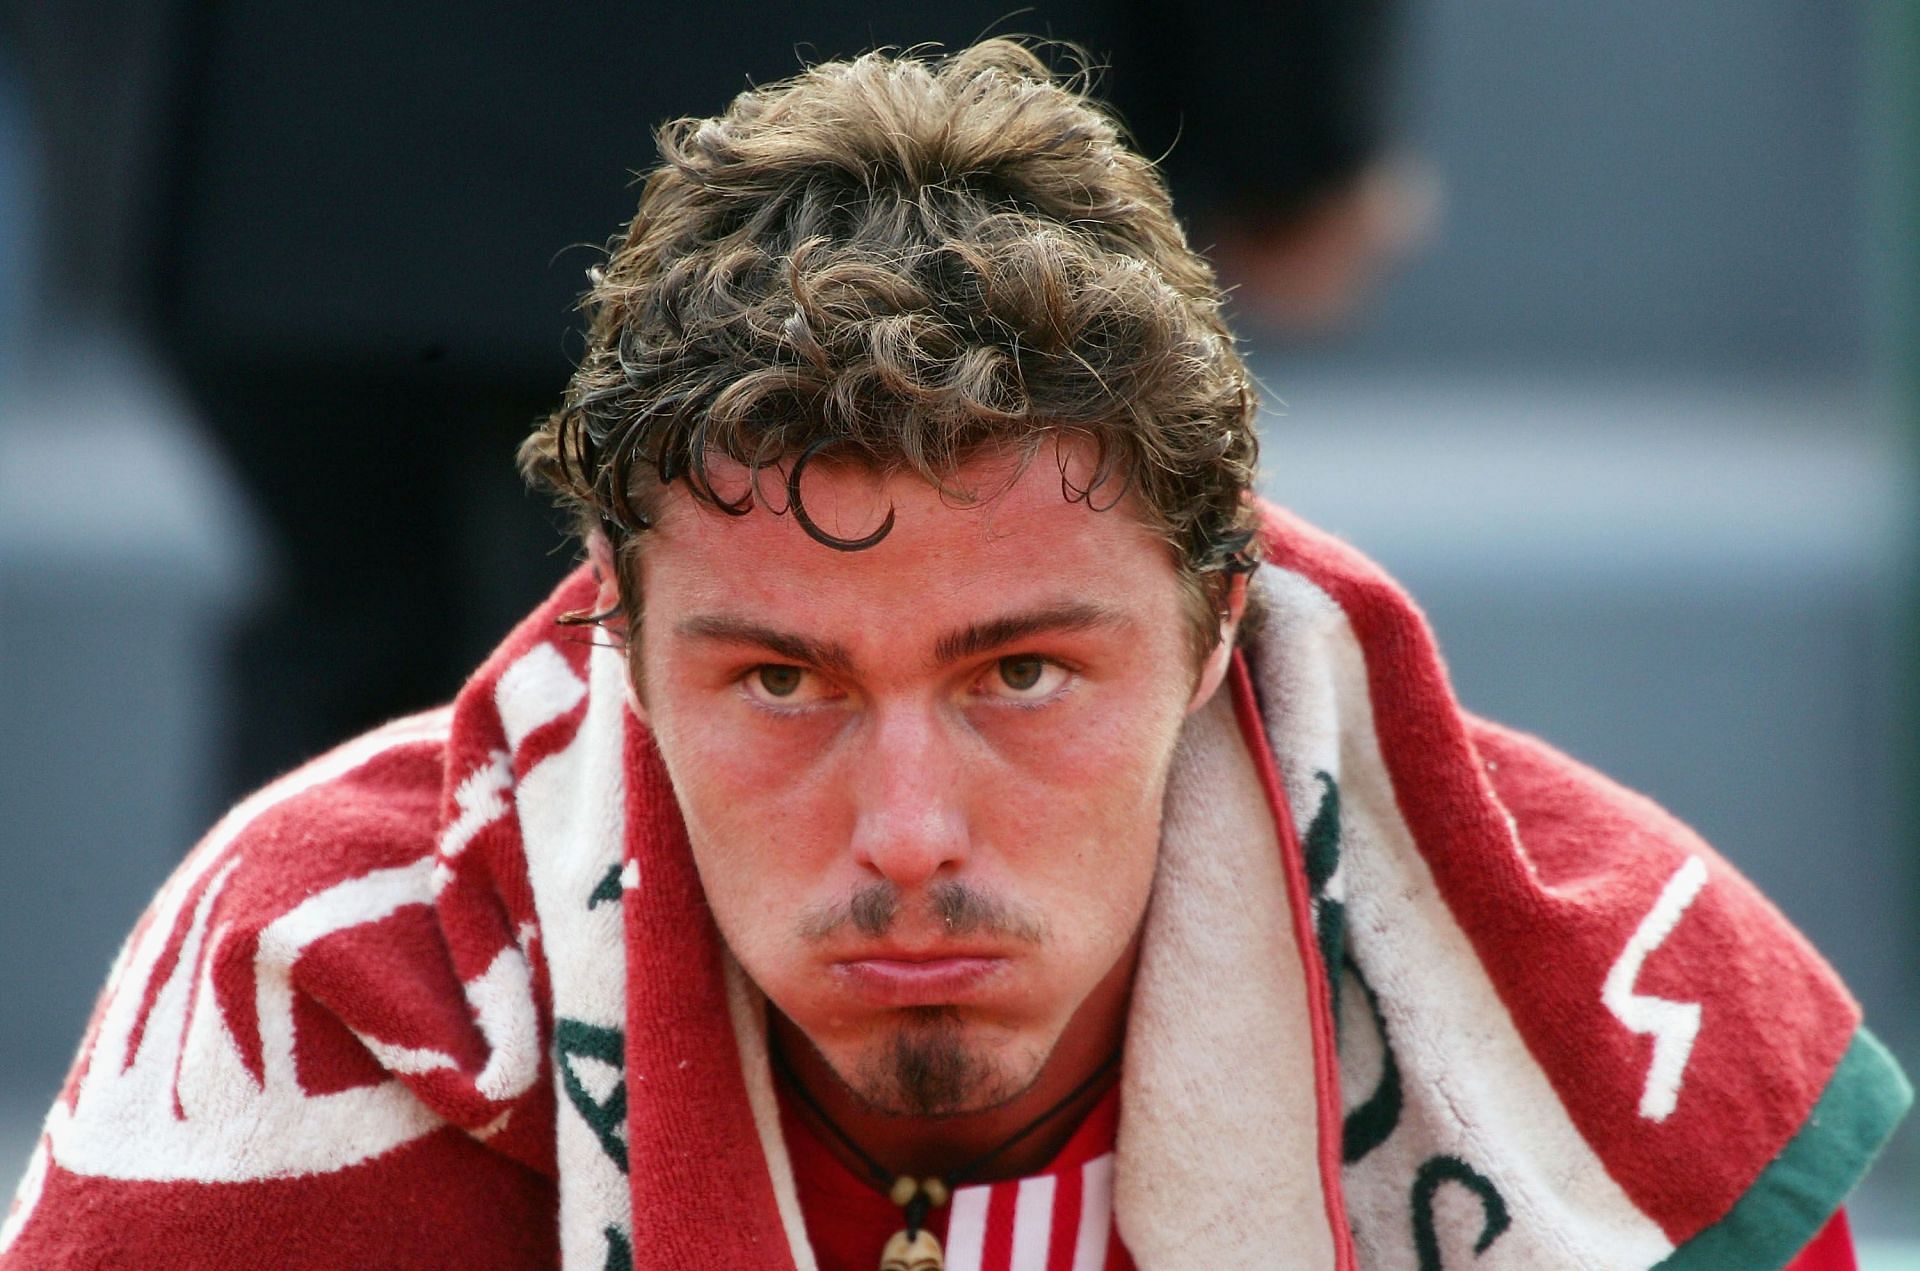 Marat Safin pictured at the 2004 French Open